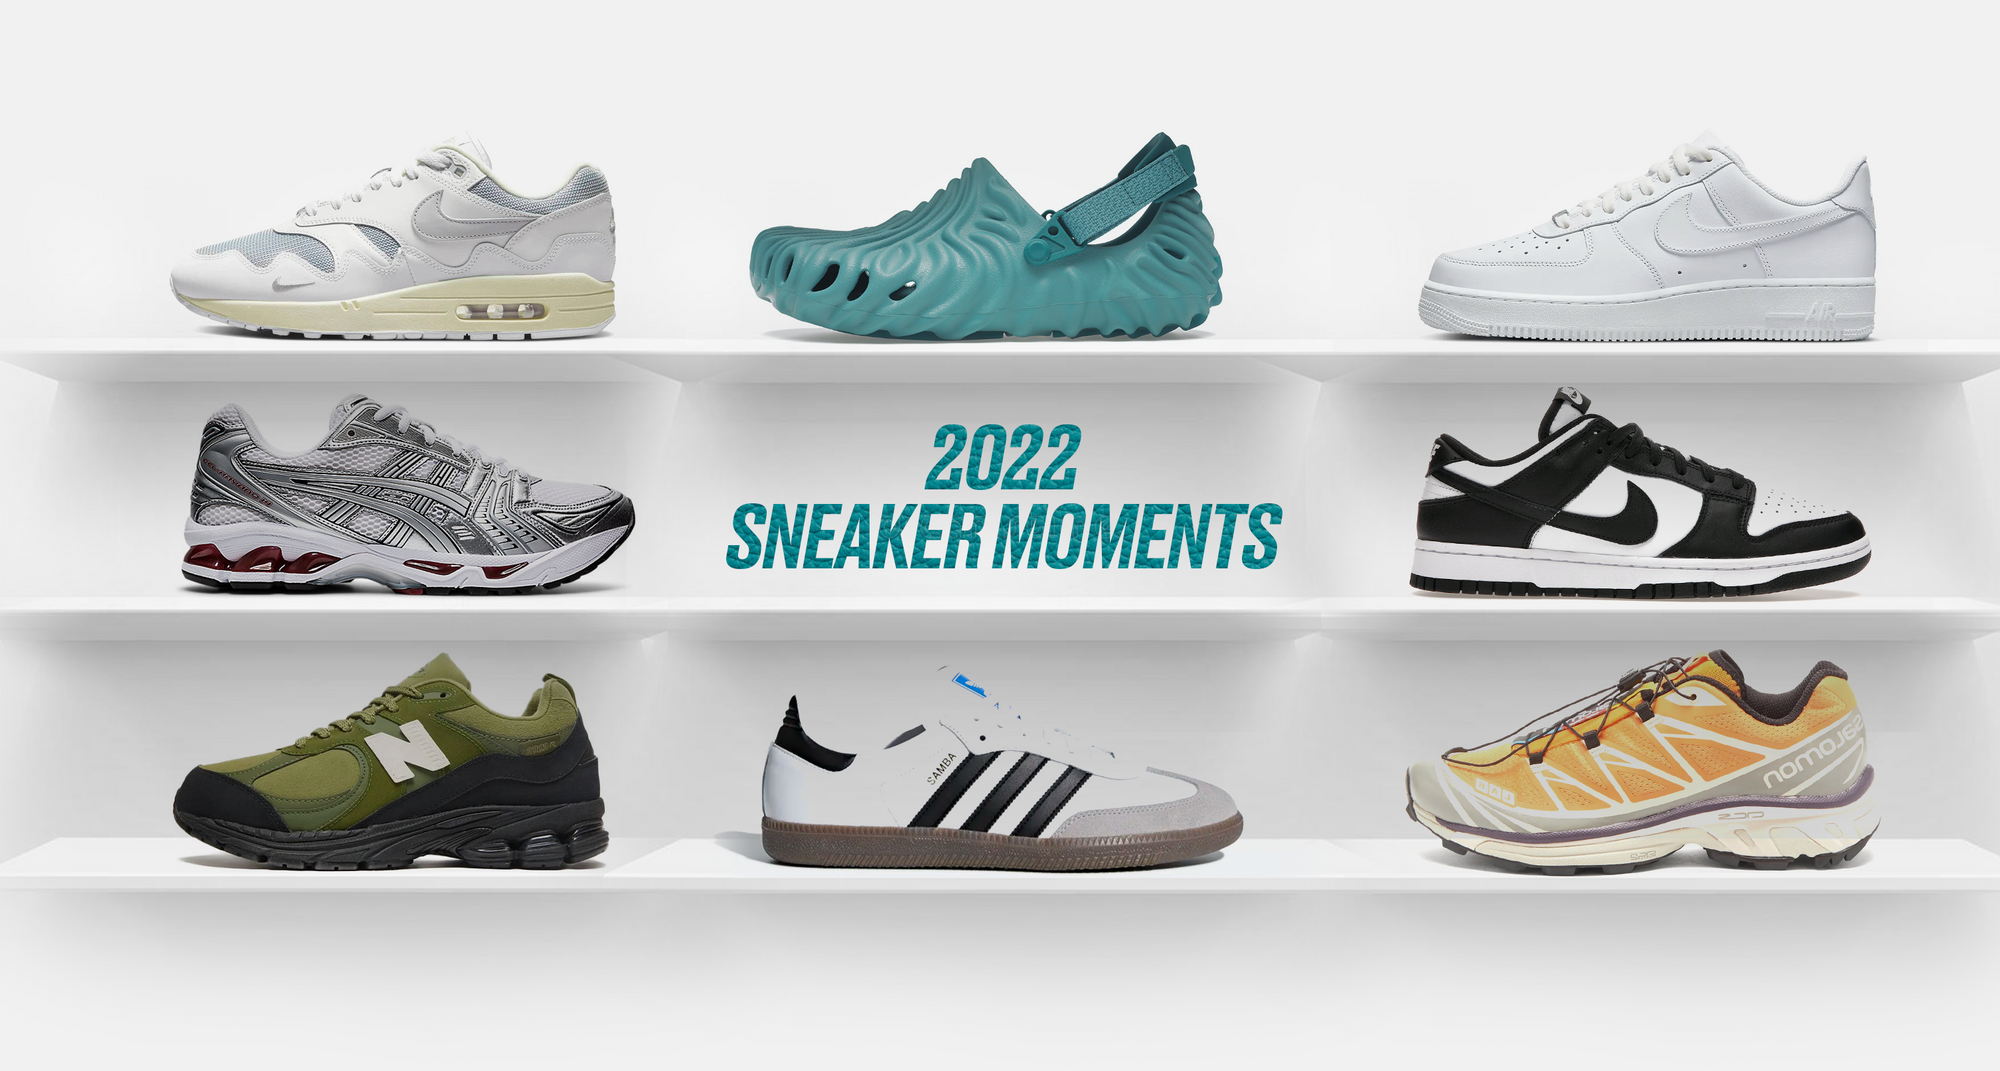 Sneakers That Had a Moment in 2022